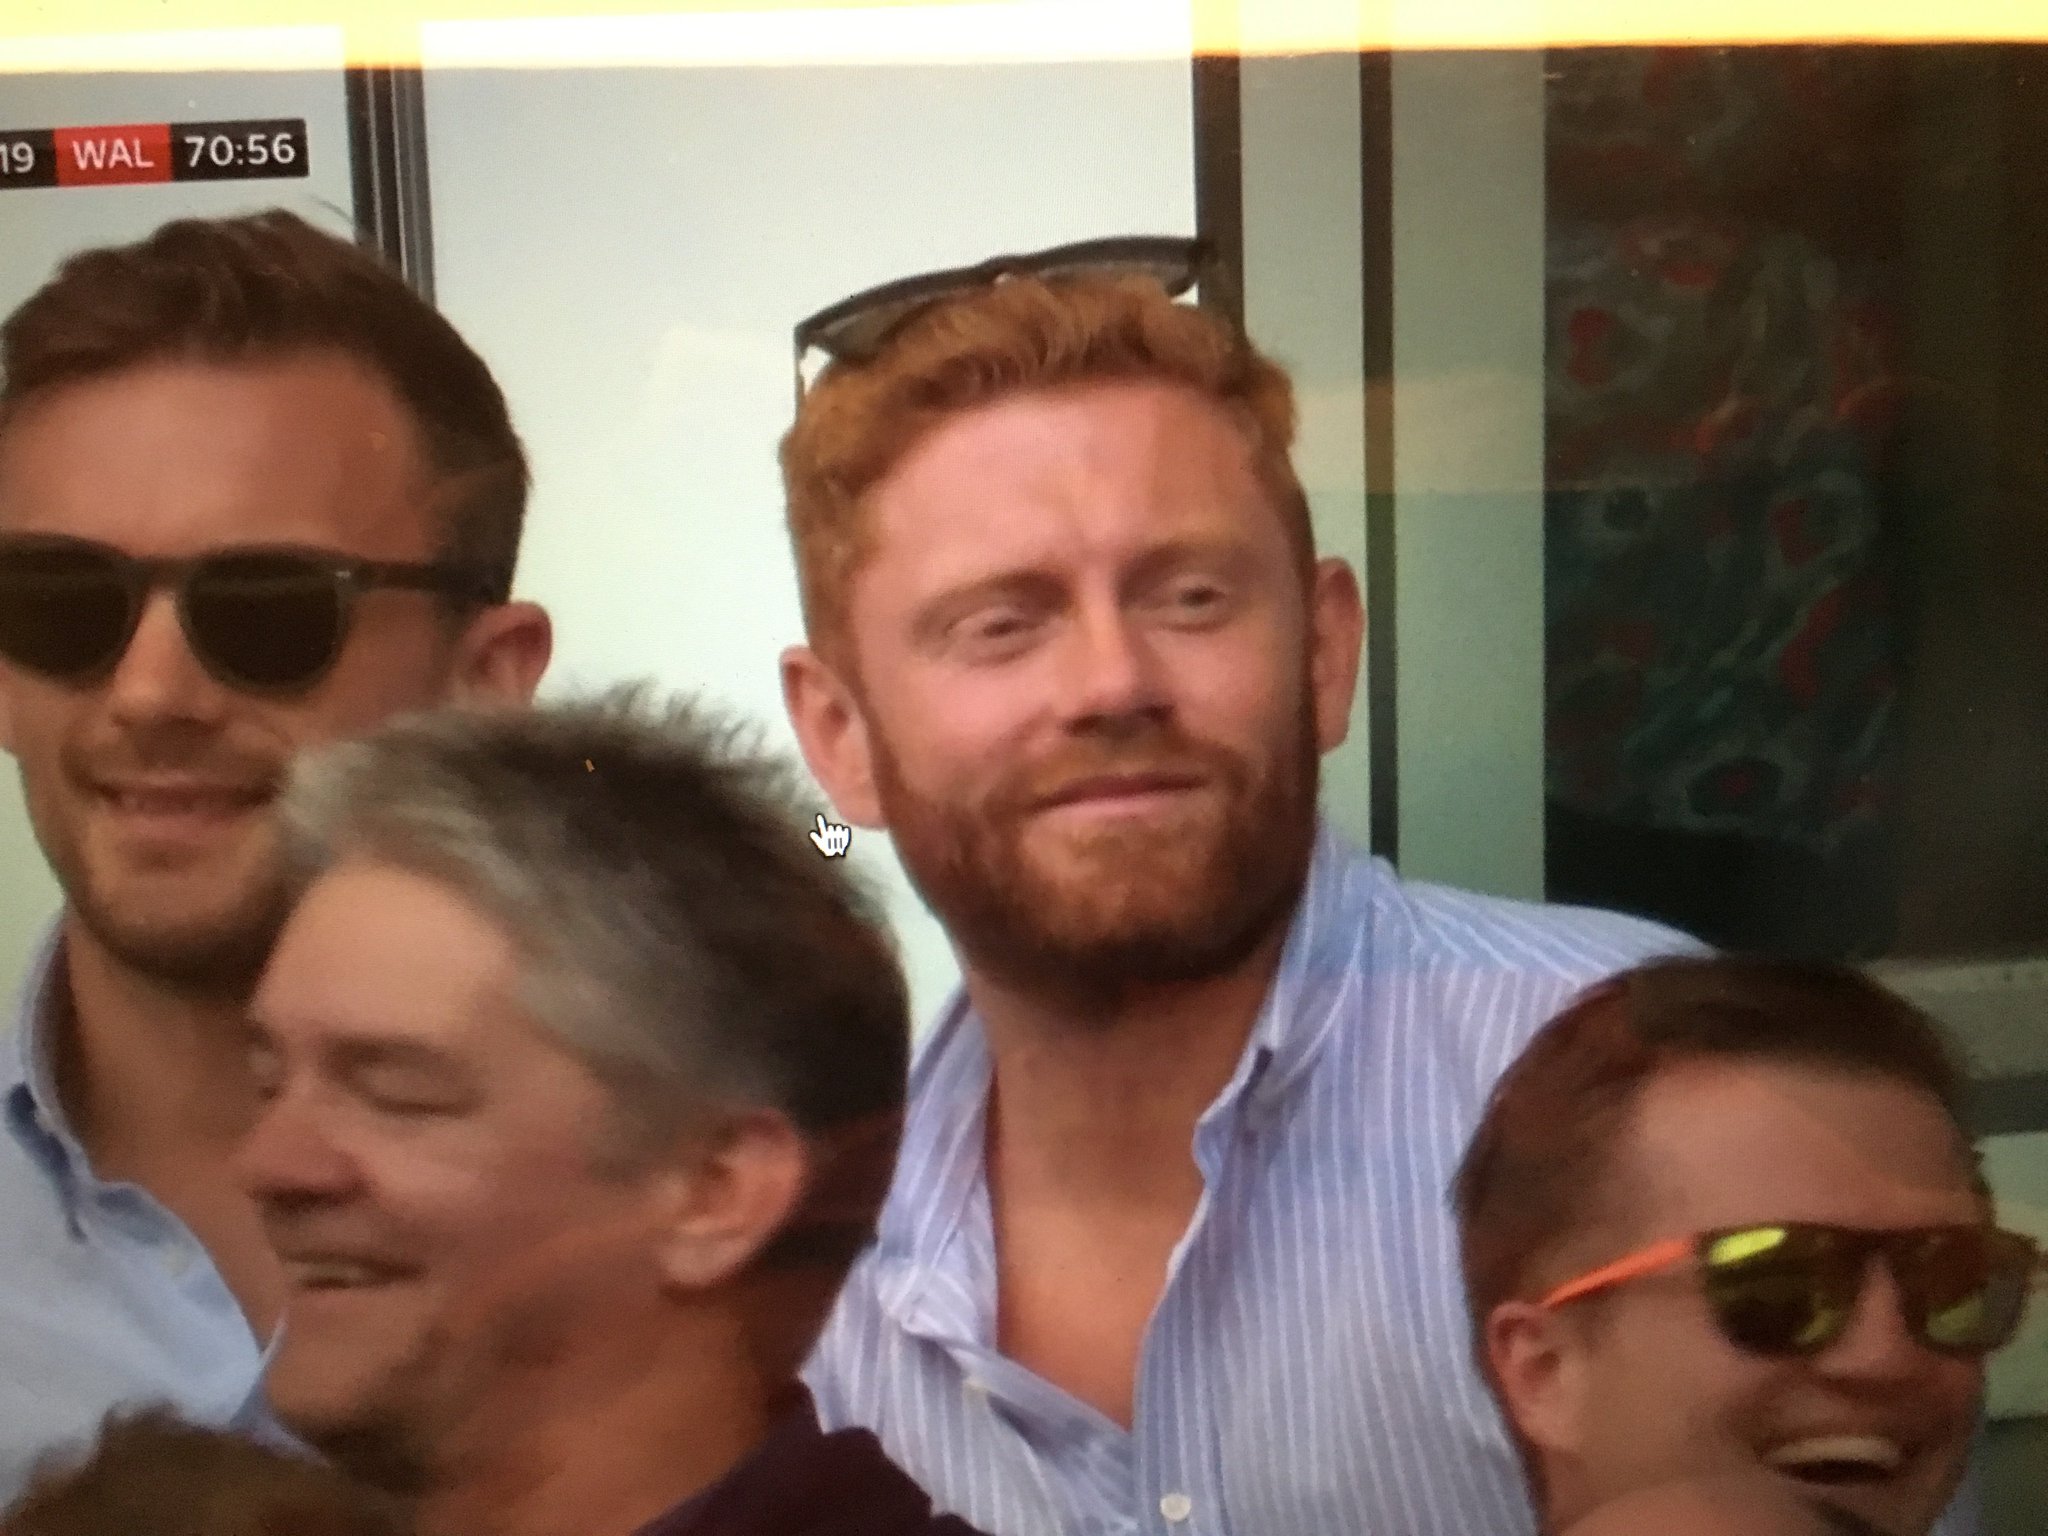 Rich Freeman When England Cricketer Jbairstow21 Was Just Shown On Dazn Jpn The Local Commentators Said It Was Good To See Prince Harry In The Crowd And Wondered Where His Wife